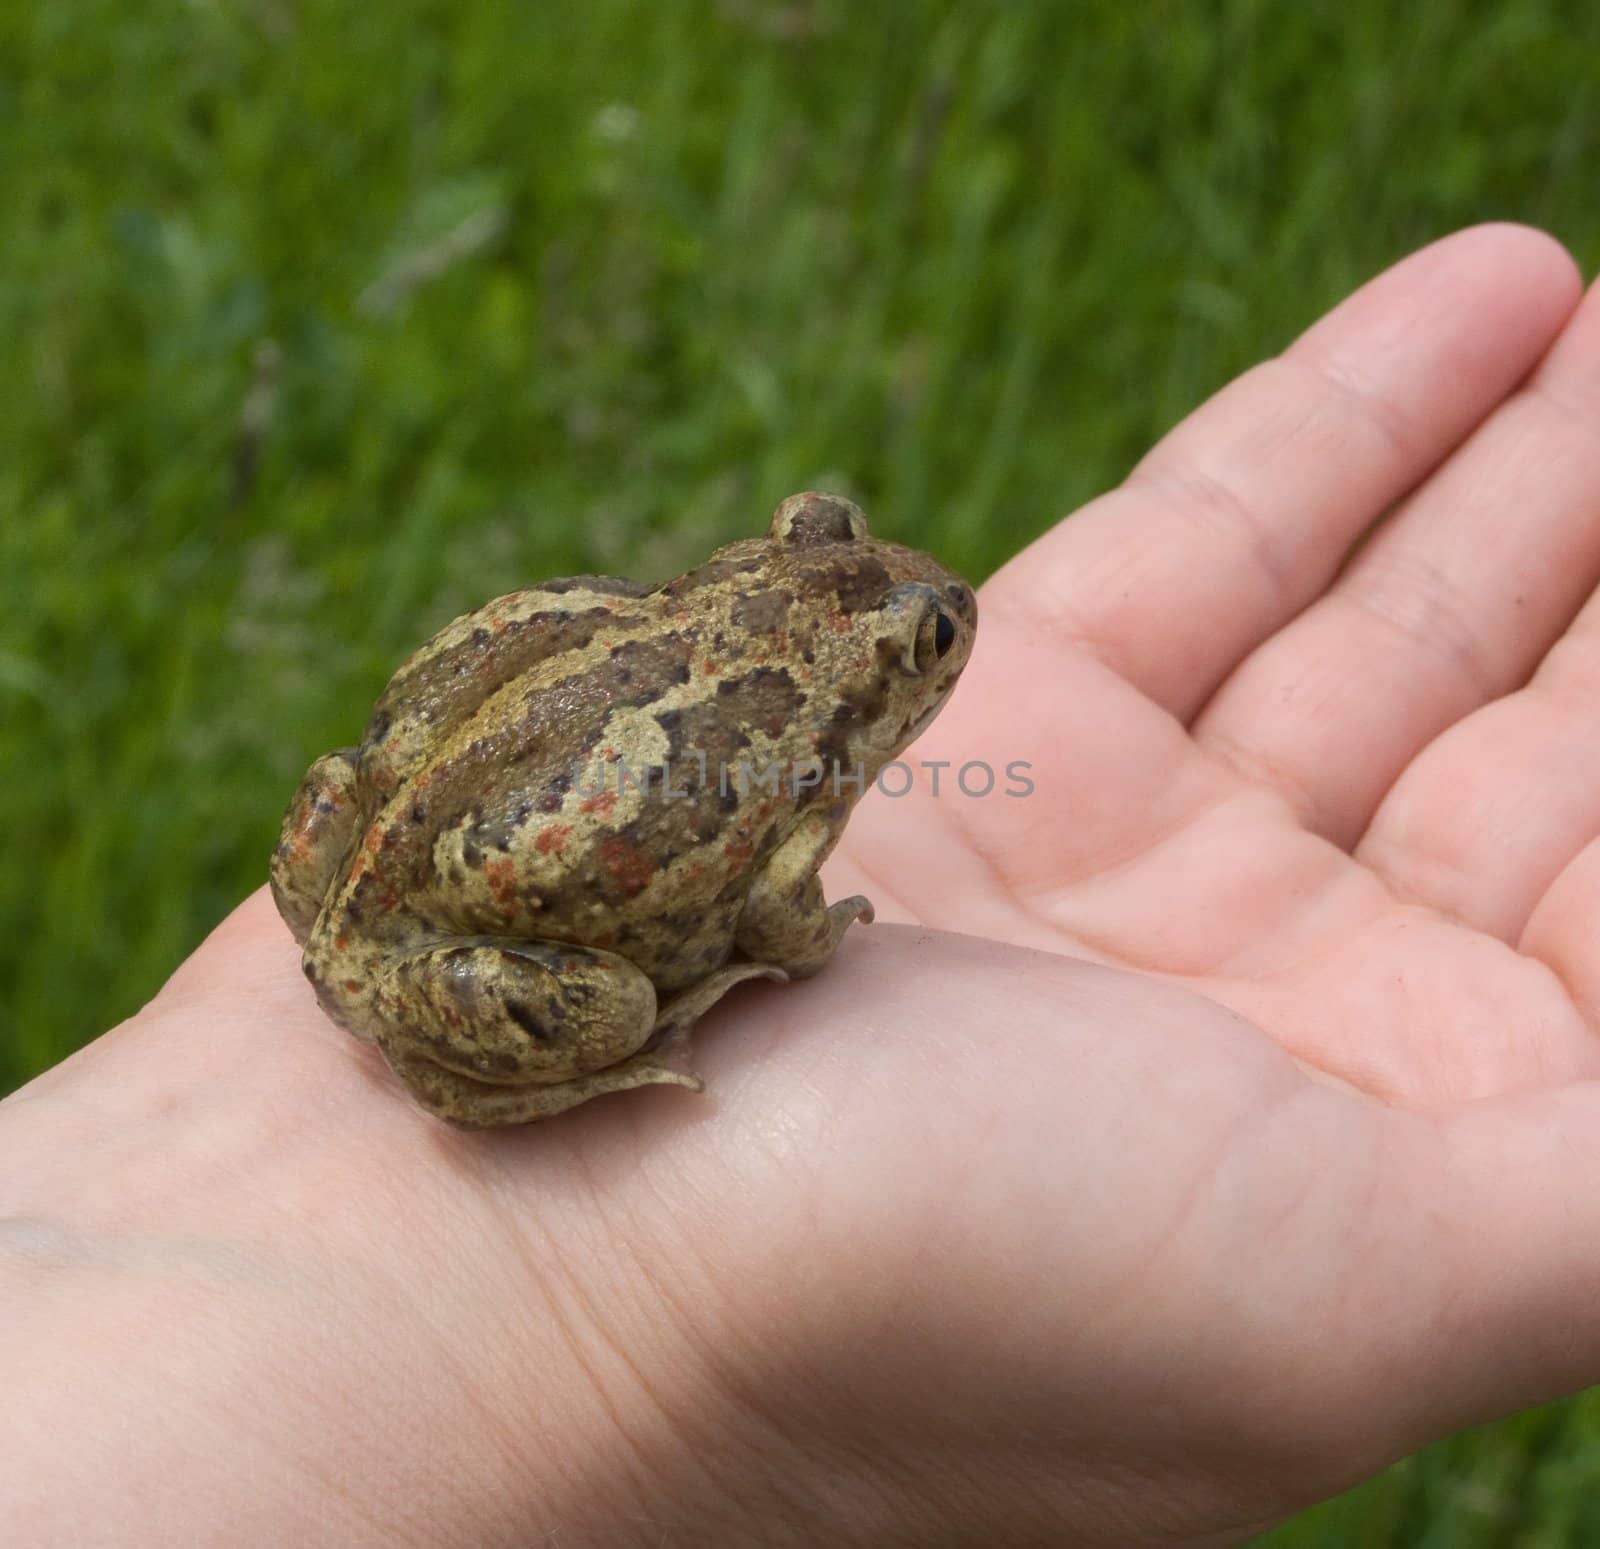 The green frog on hand